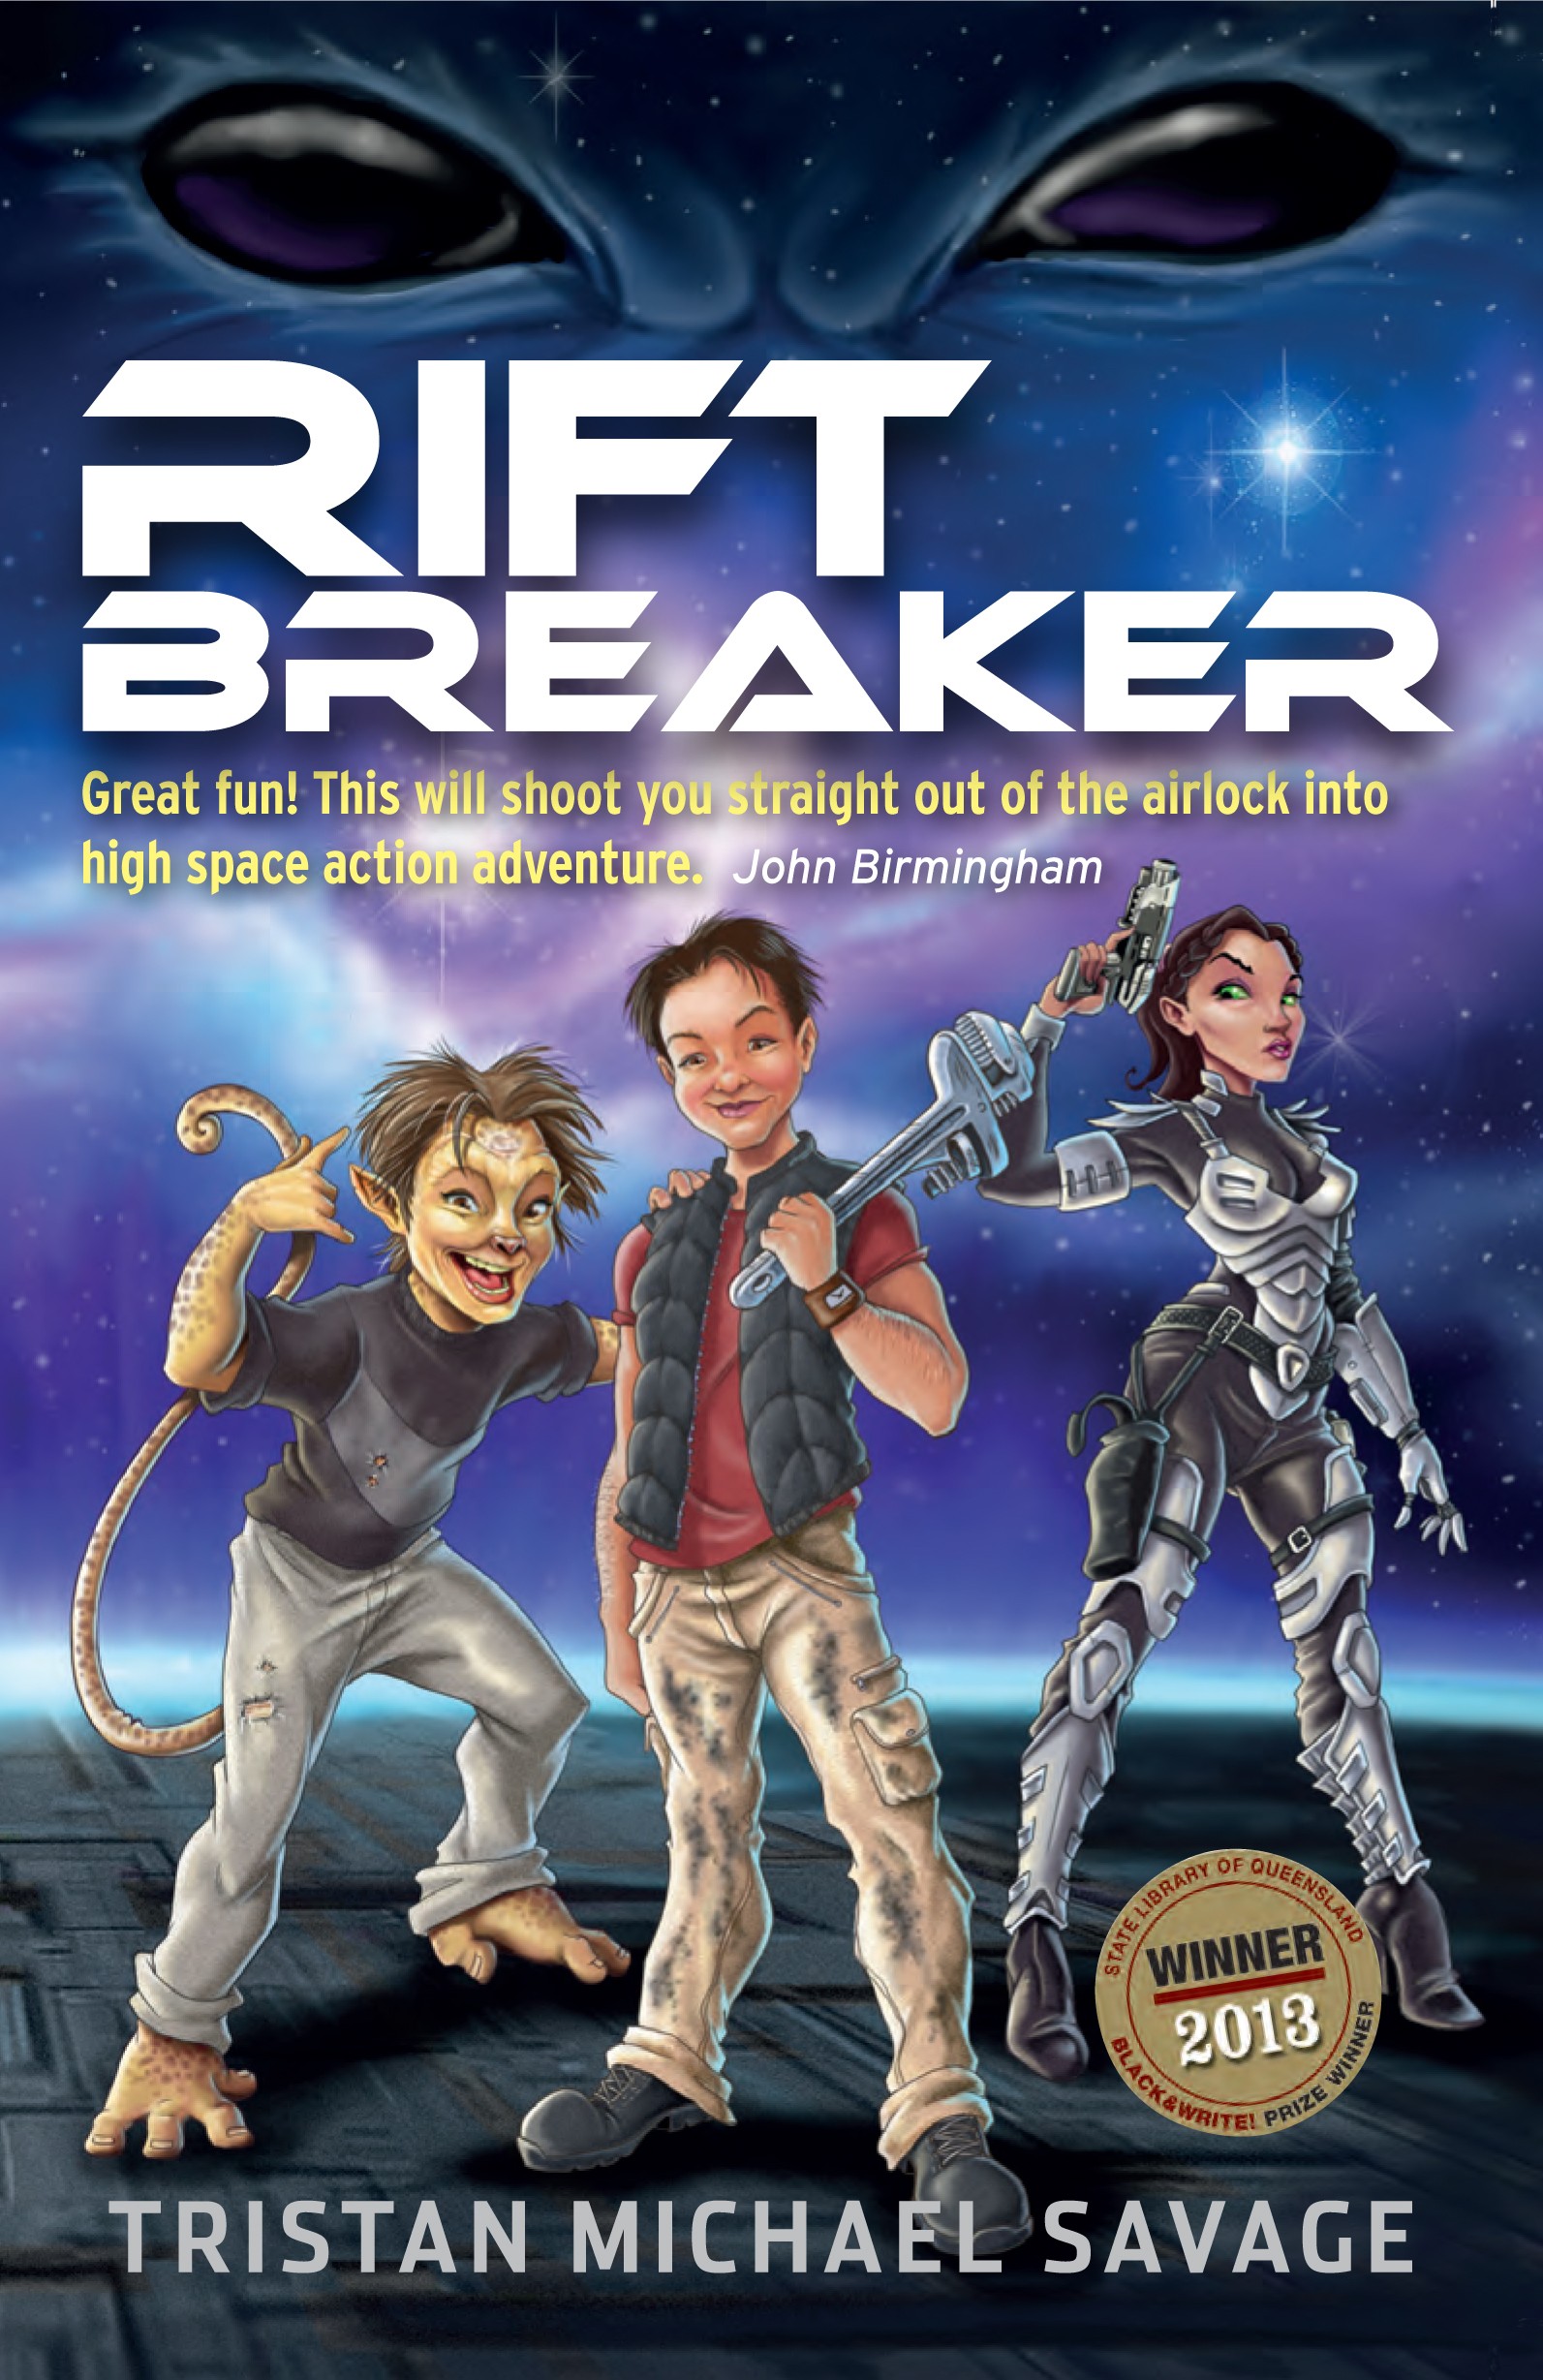 Cover of Rift Breaker by Tristan Savage